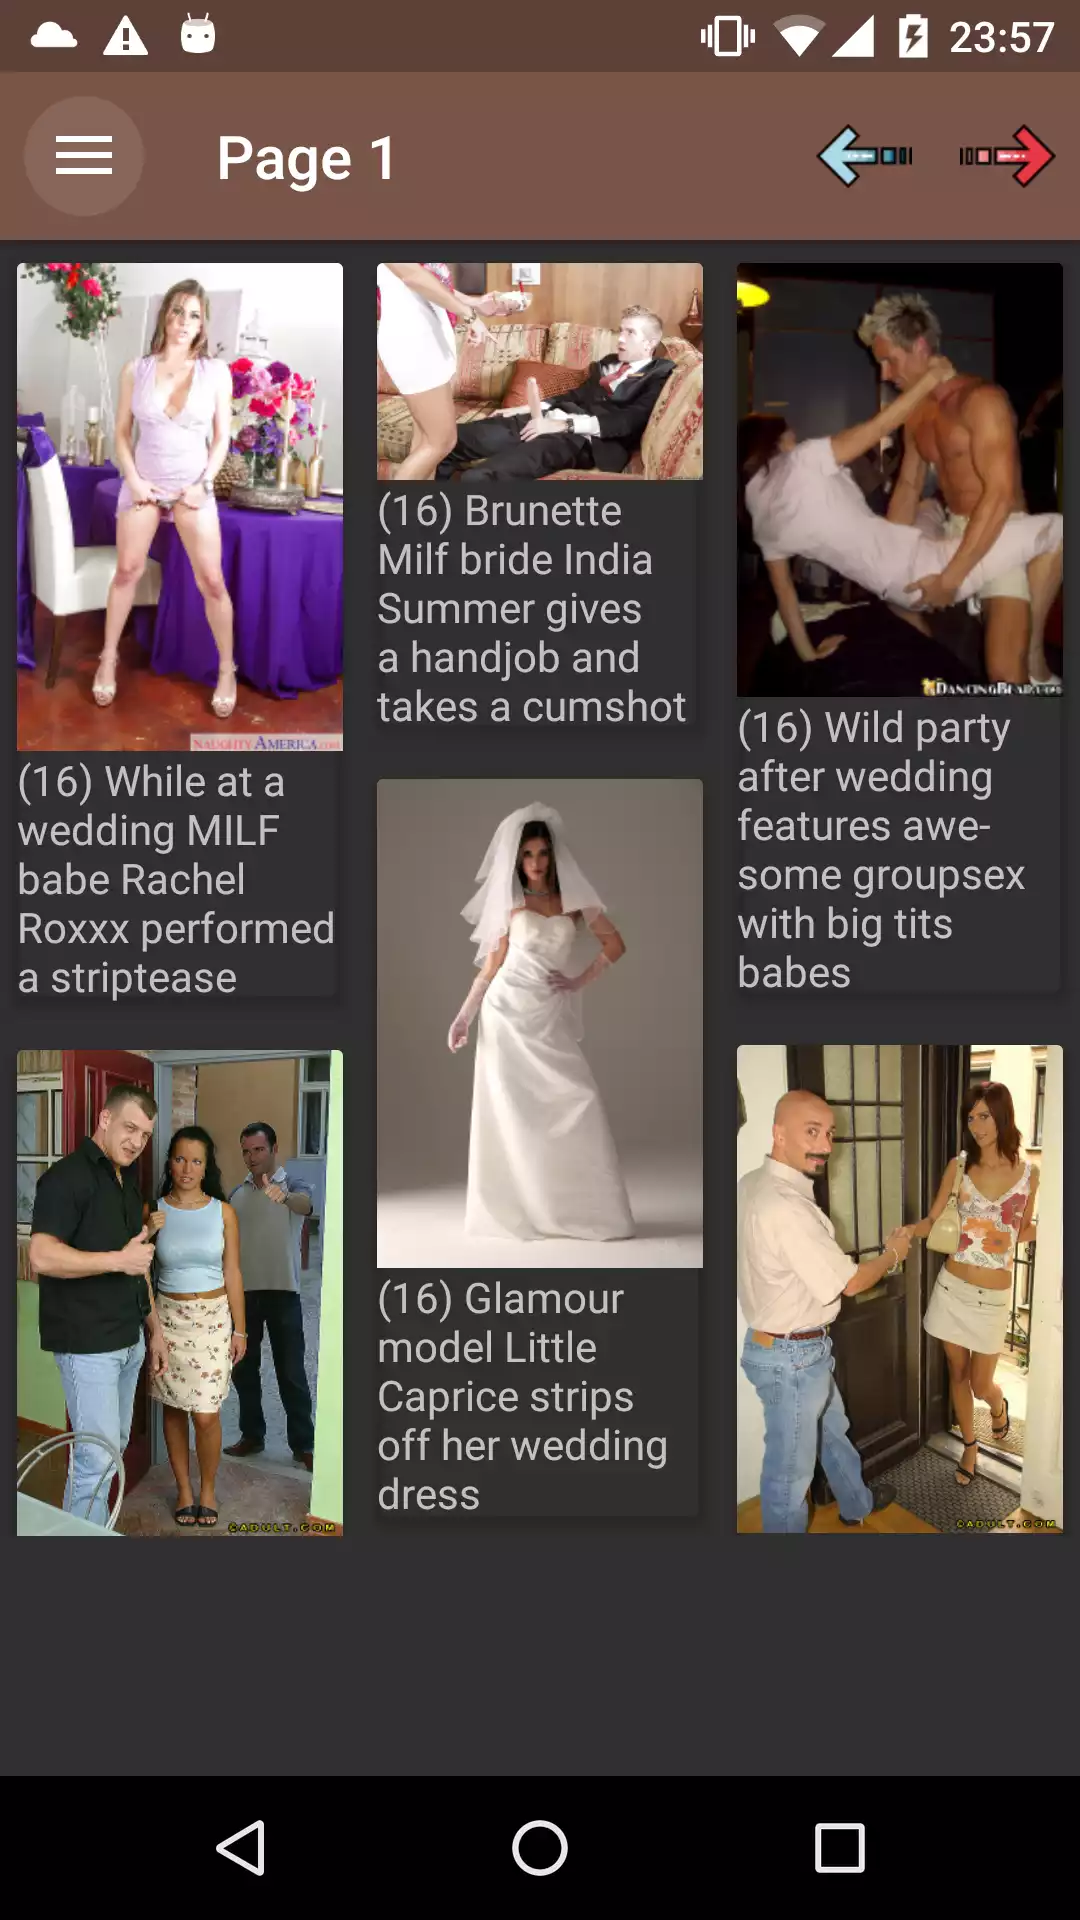 Wedding Galleries apk,sexy,app,collection,star,android,porn,pics,gloryhole,hentai,new,wallpaper,sara,pic,jay,lisa,photos,apps,galleries